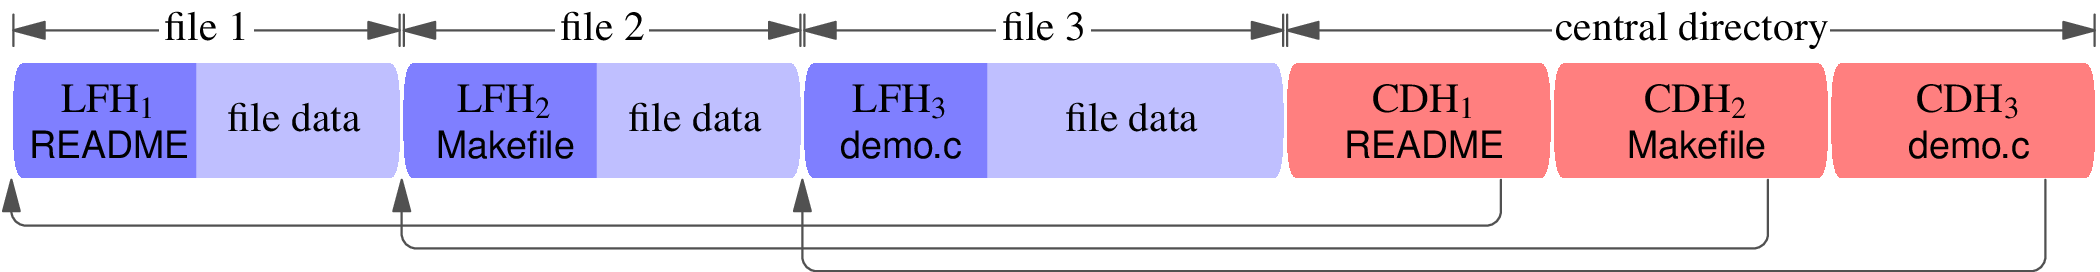 A block diagram of the structure of a zip file. The central directory header consists of three central directory headers labeled CDH[1] (README), CDH[1] (Makefile), and CDH[3] (demo.c). The central directory headers point backwards to three local file headers LFH[1] (README), LFH[2] (Makefile), and LFH[3] (demo.c). Each local file header is joined with file data. The three joined blocks of (local file header, file data) are labeled file 1, file 2, and file 3.